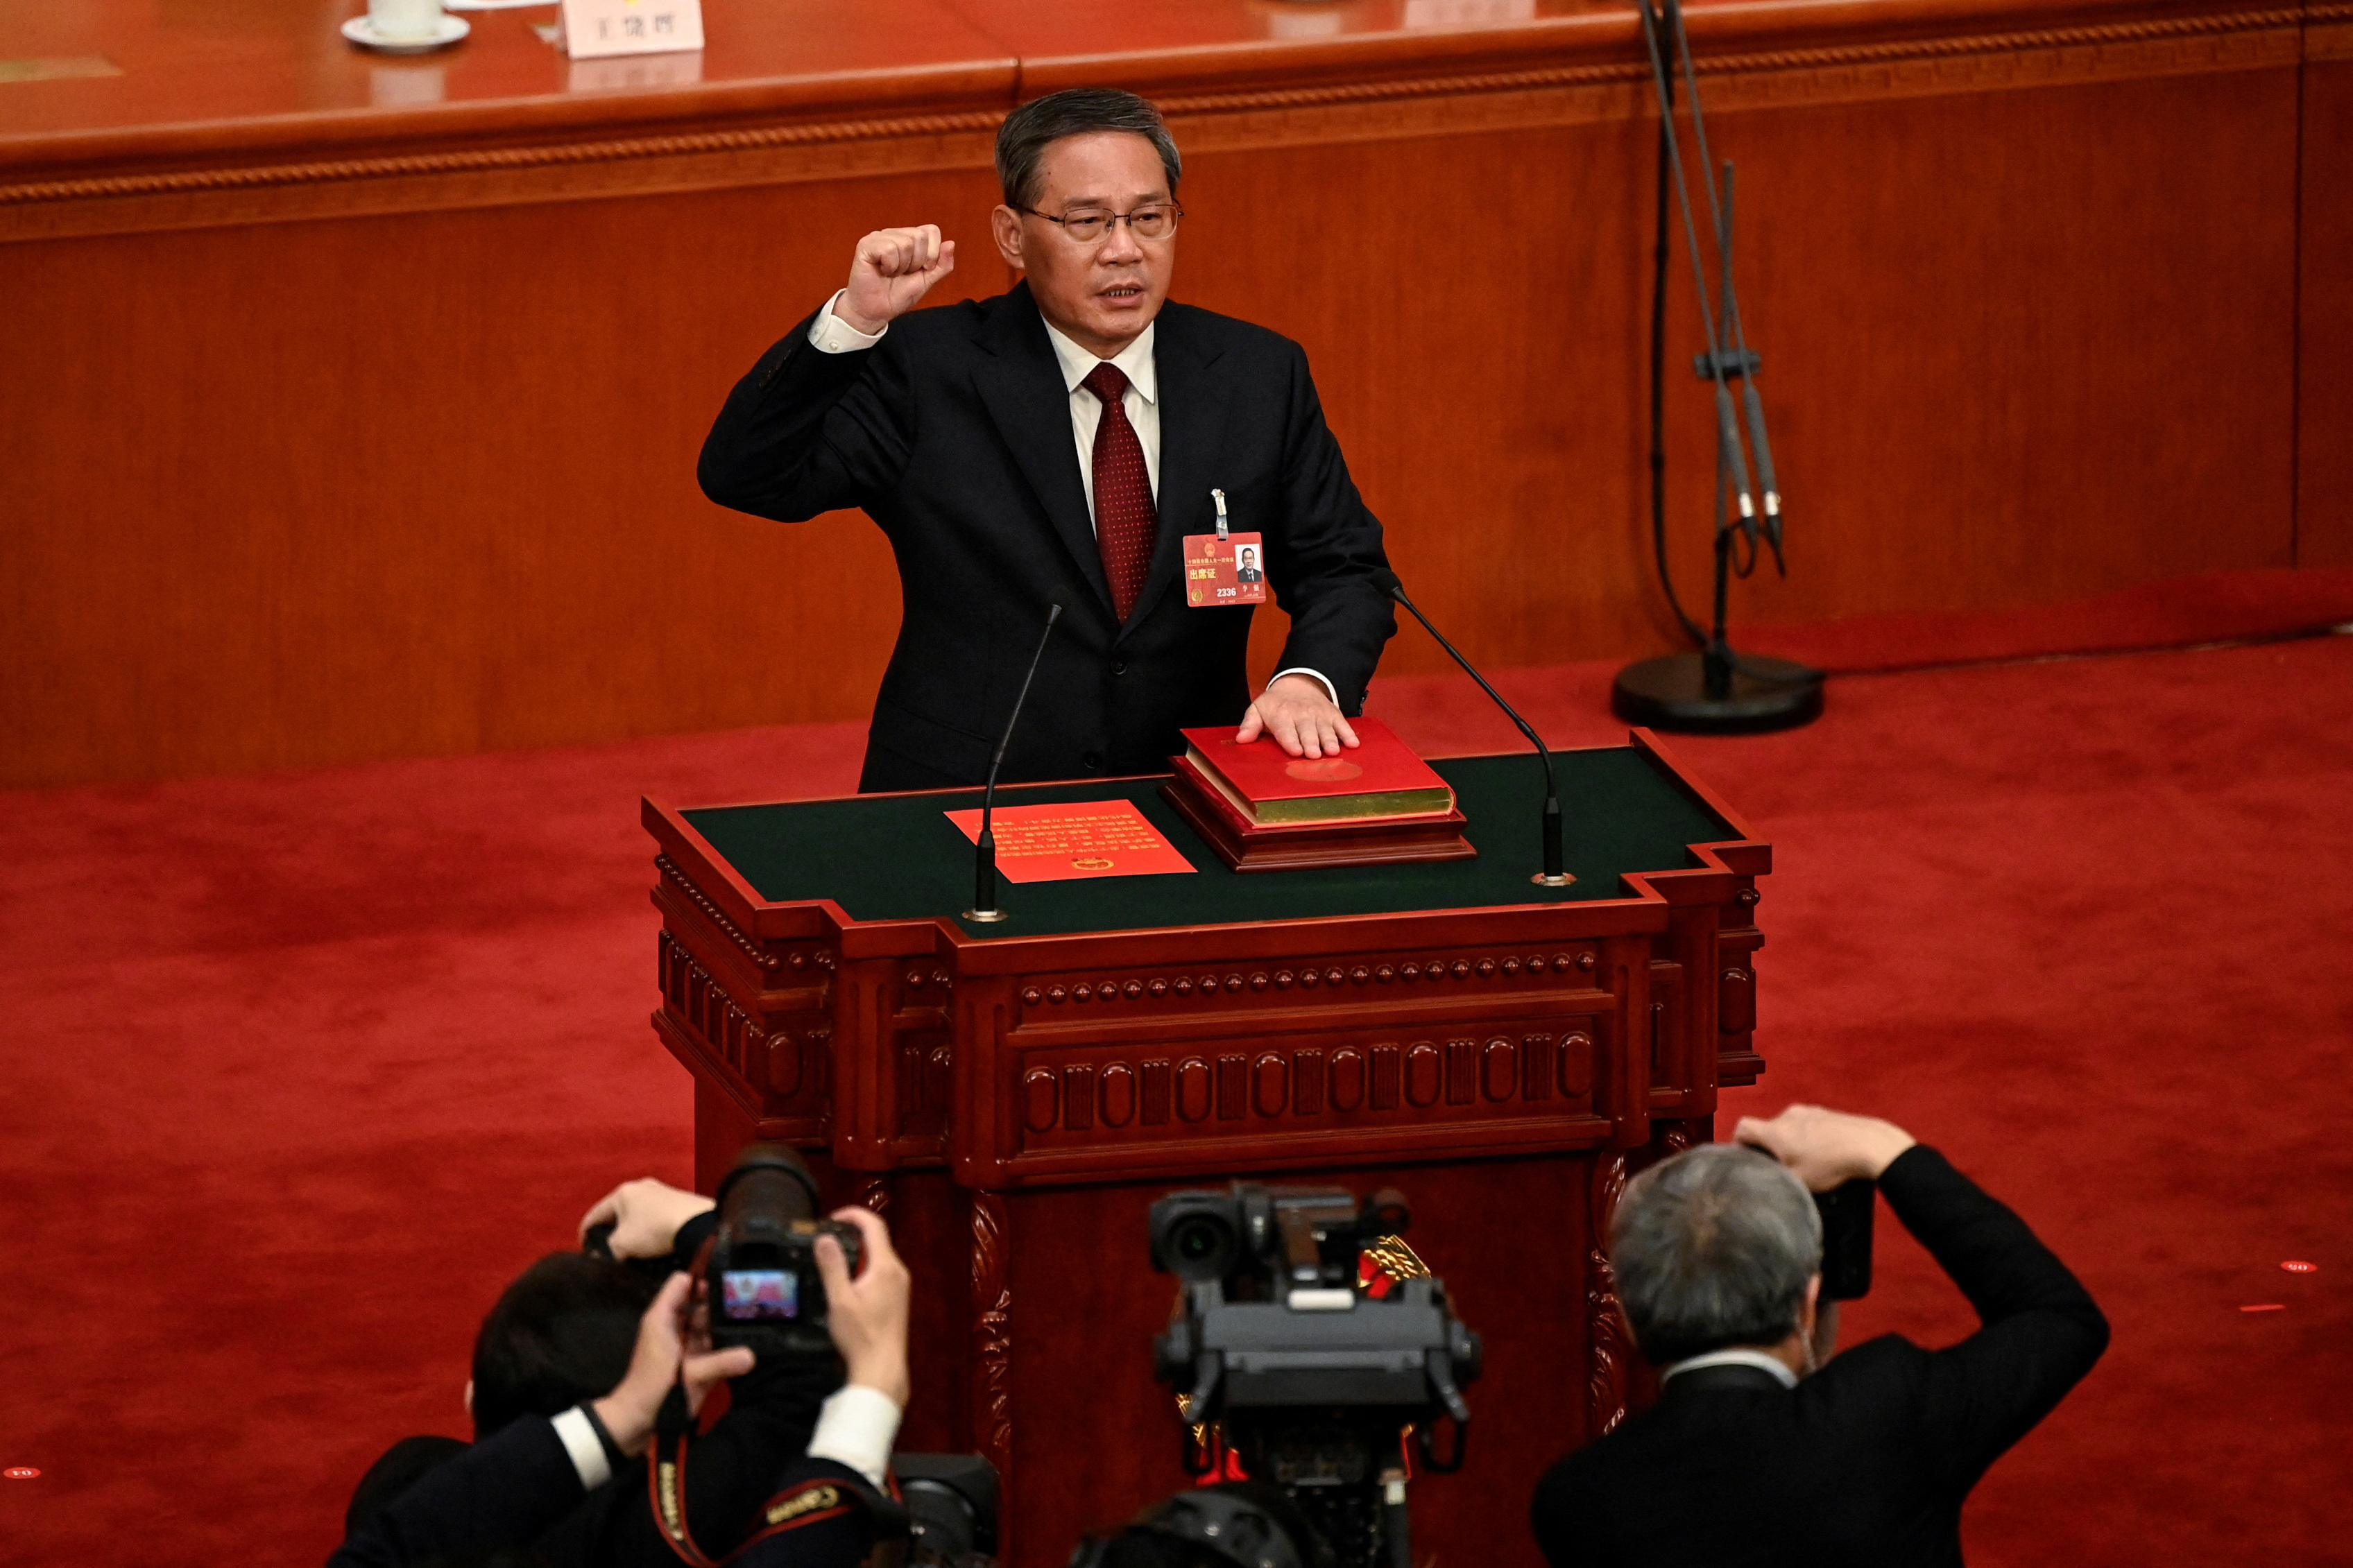 Fourth plenary session of the National People's Congress (NPC) in Beijing